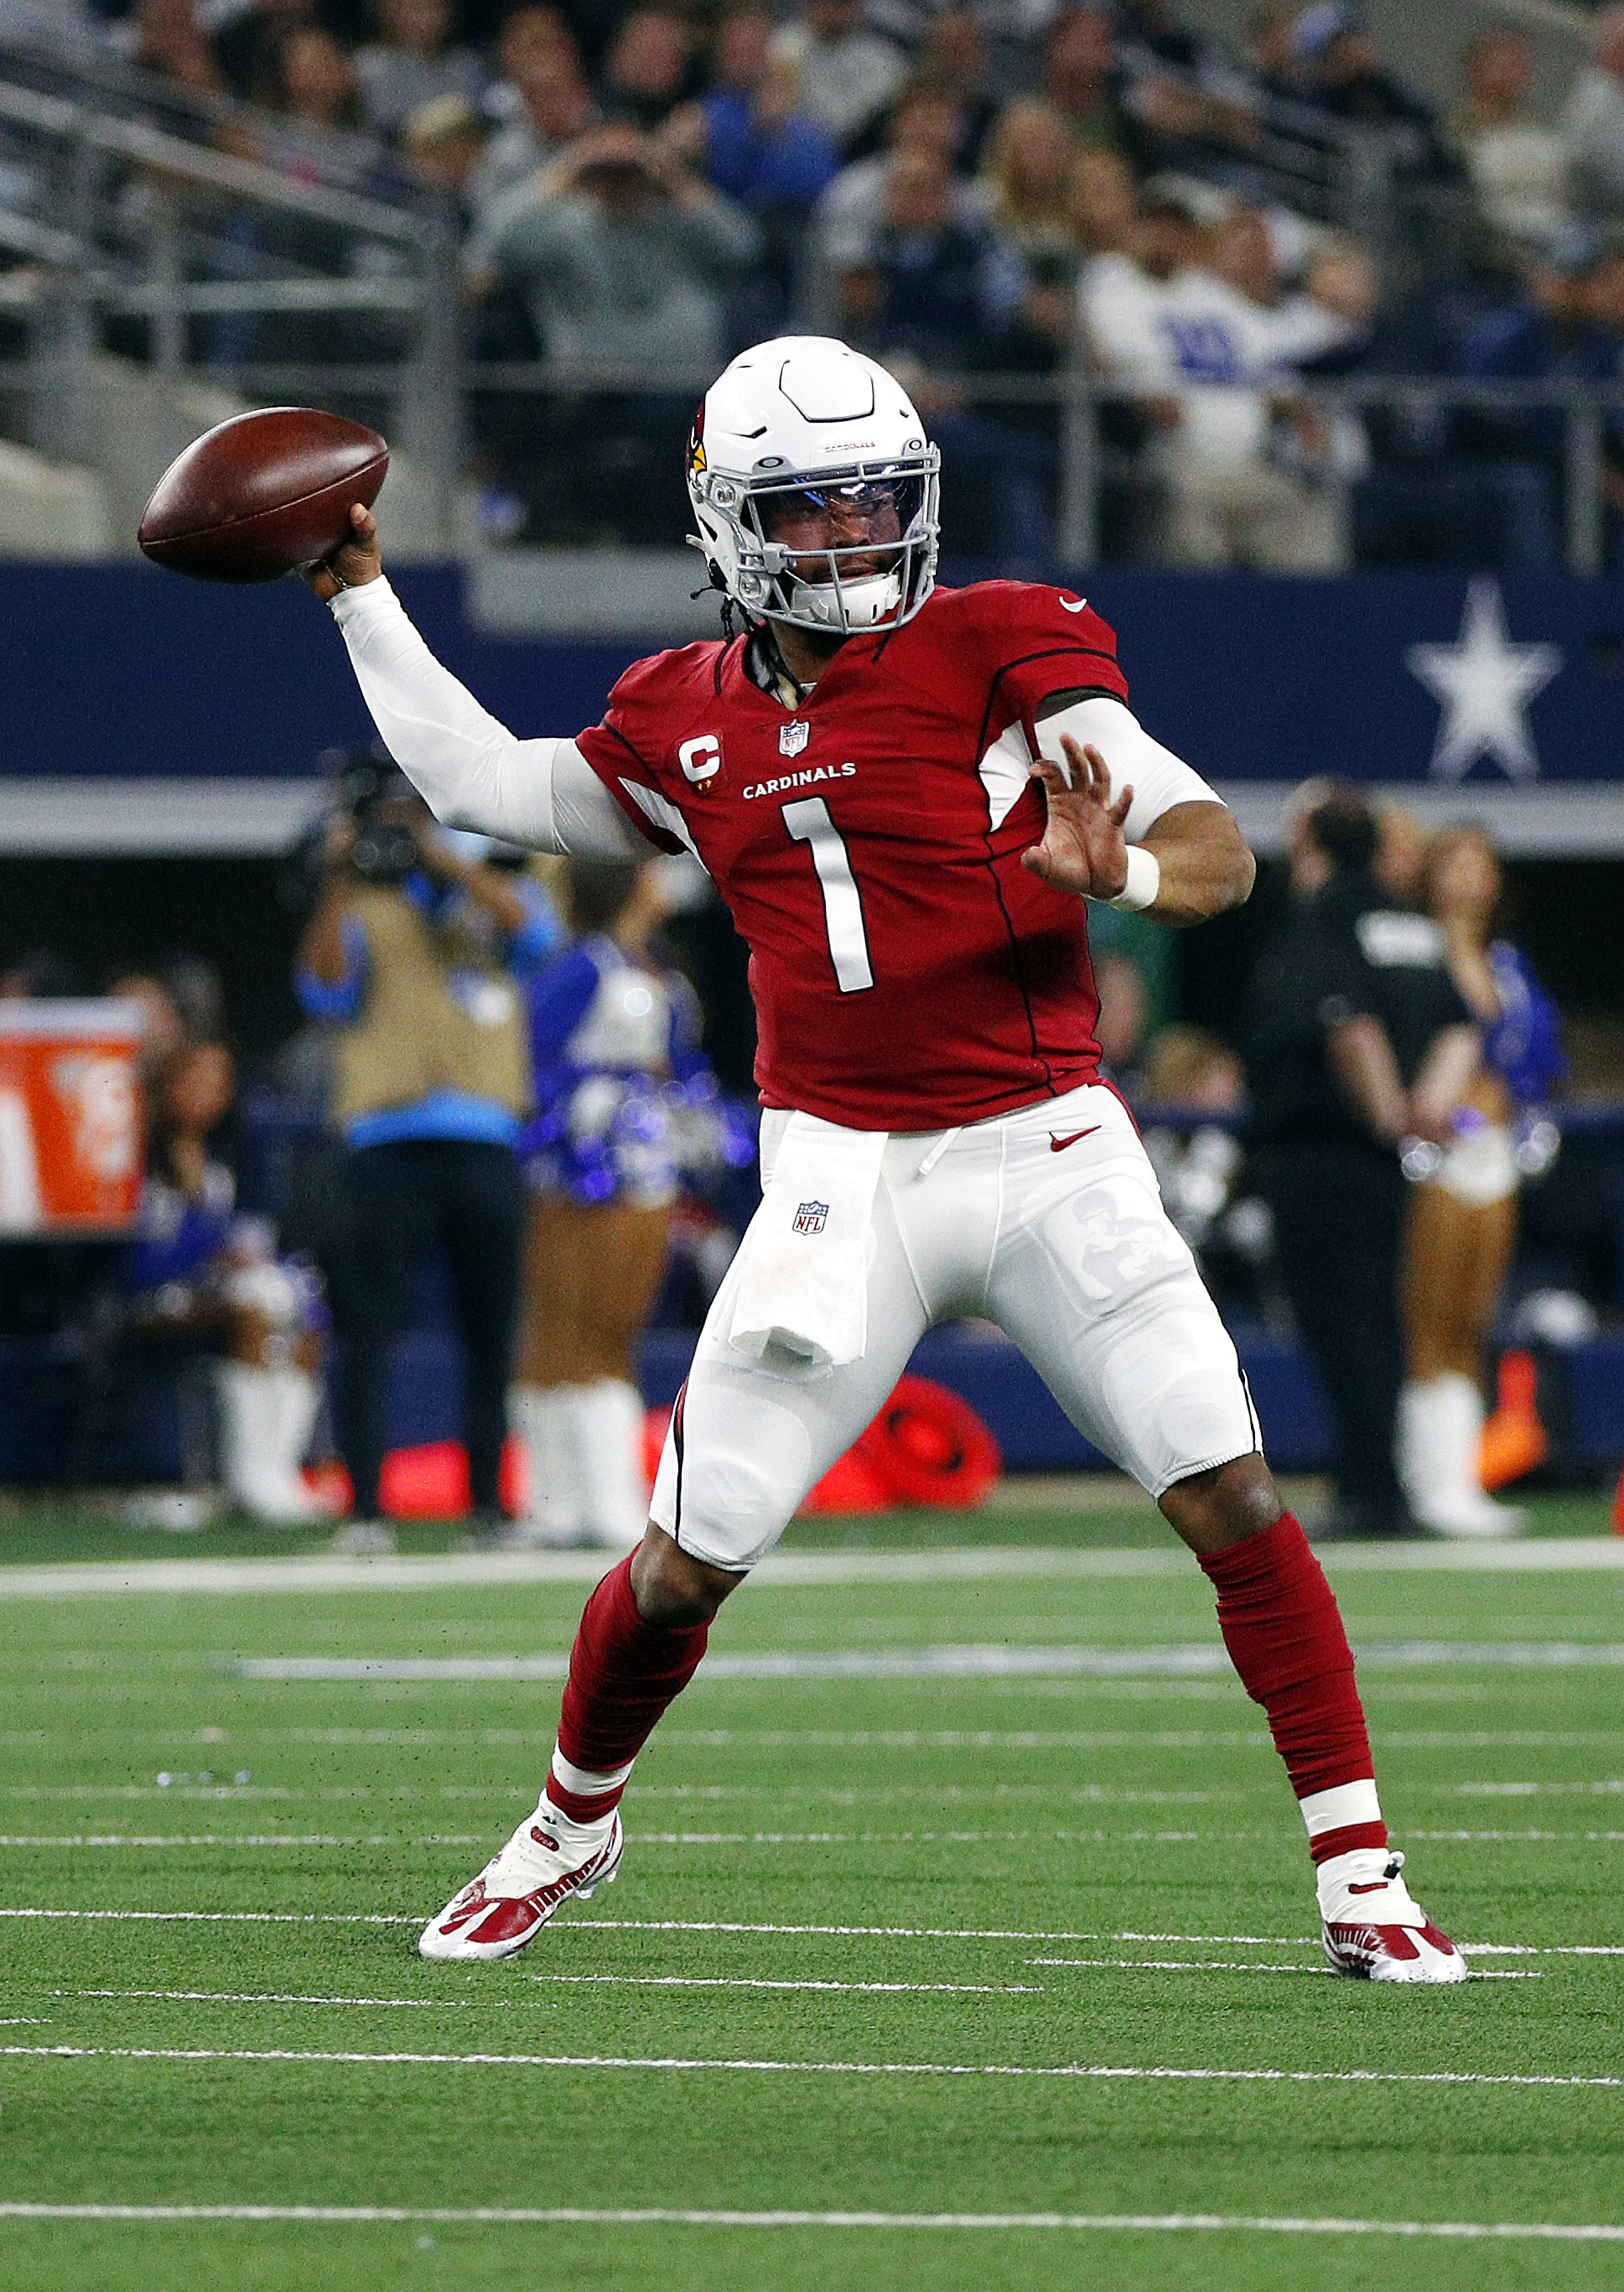 How the Arizona Cardinals could get to the NFL playoffs